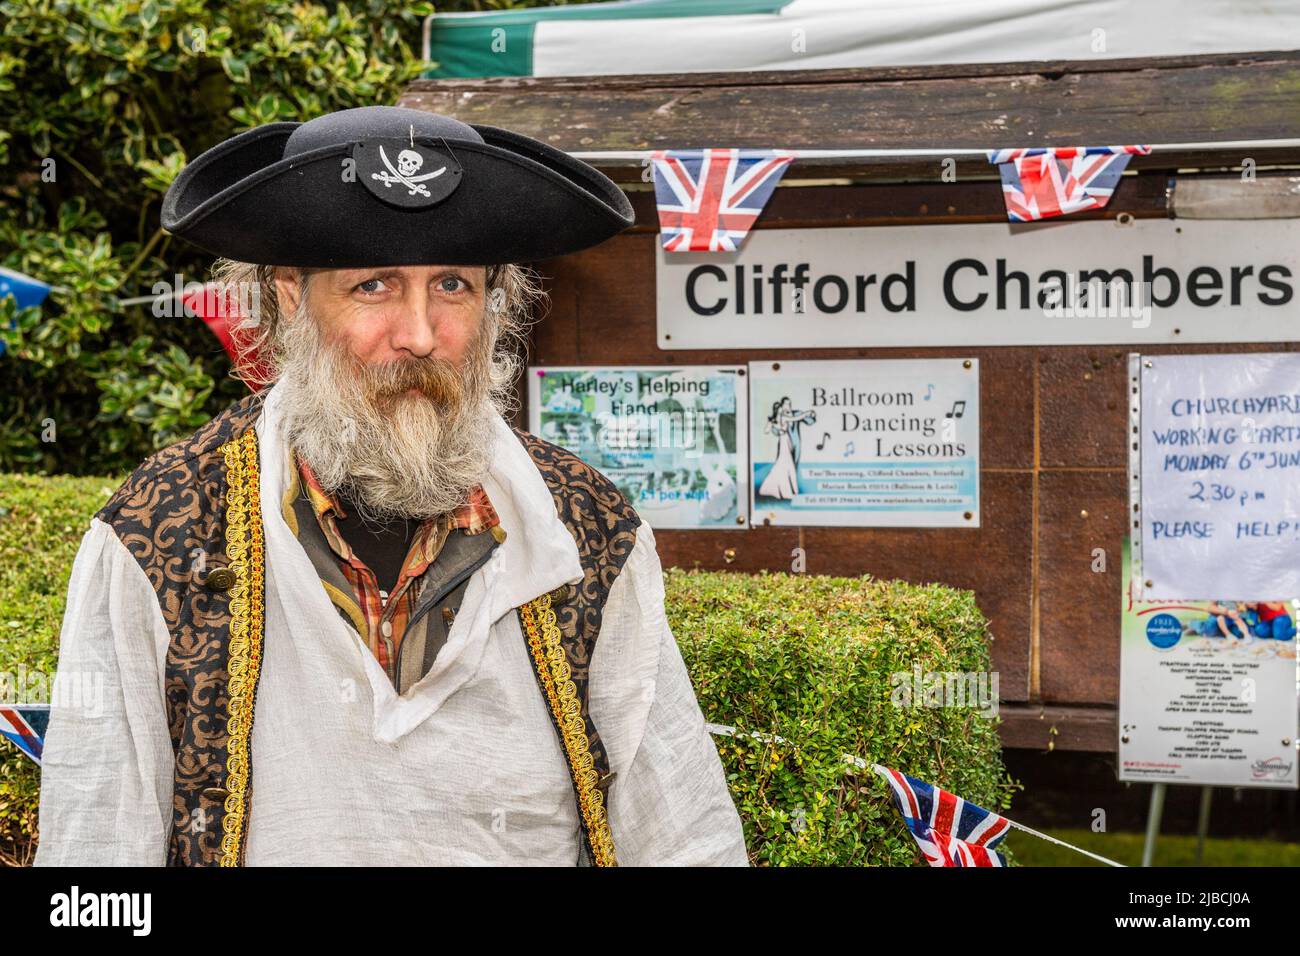 Clifford Chambers, Warwickshire, UK. 5th June, 2022. The picturesque village of Clifford Chambers held a Platinum Jubilee in its village hall today. Enjoying the celebrations was Stewart the Pirate from Clifford Chambers. Credit: AG News/Alamy Live News Stock Photo